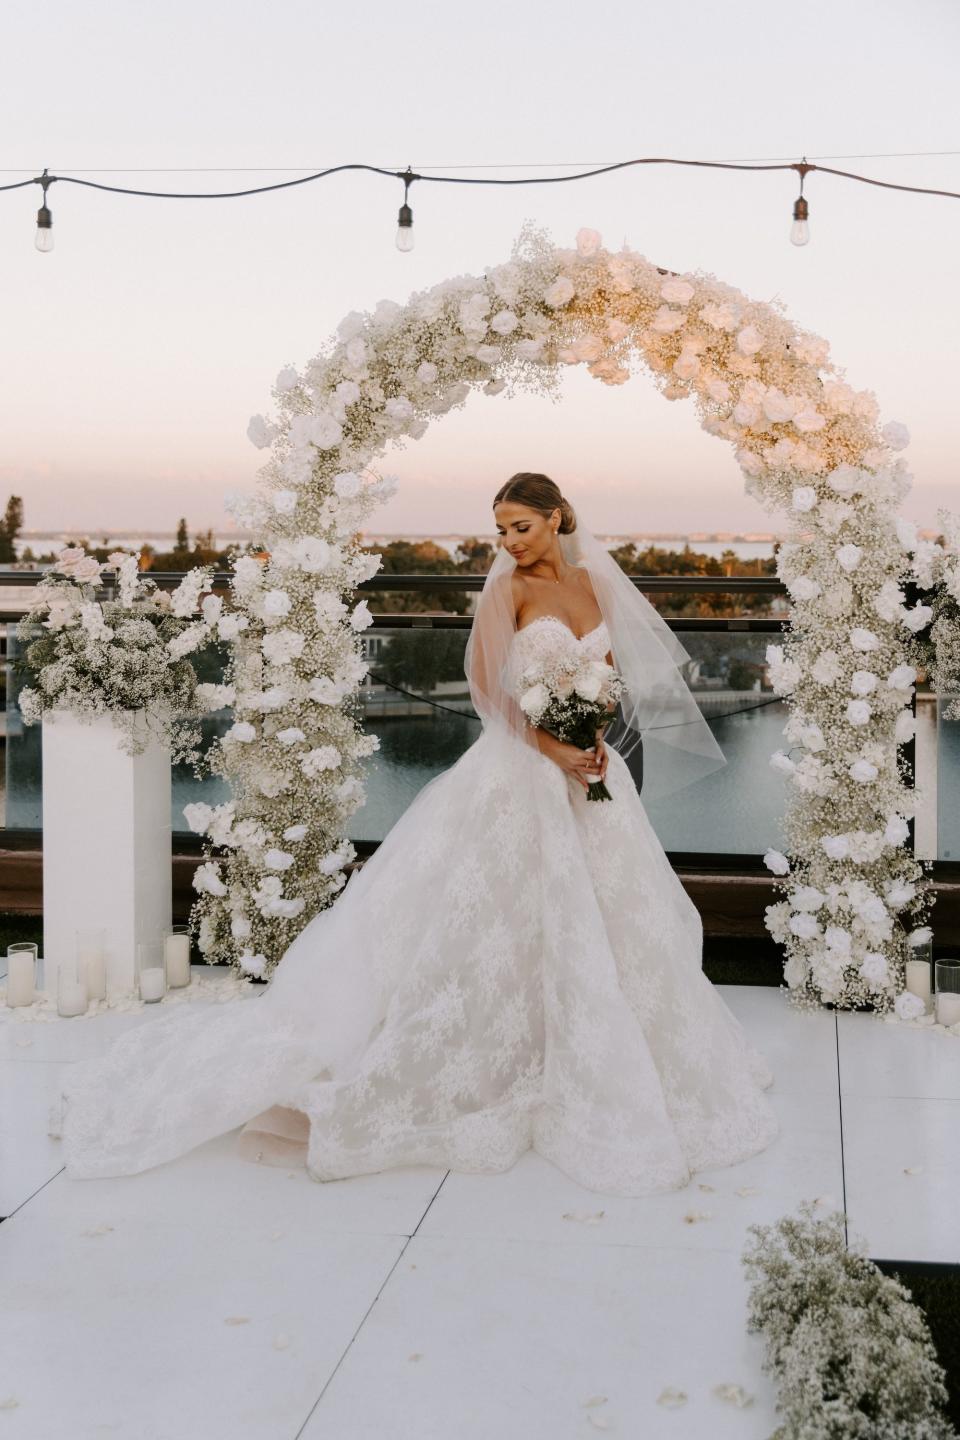 A bride stands in front of a floral arch in her wedding dress.